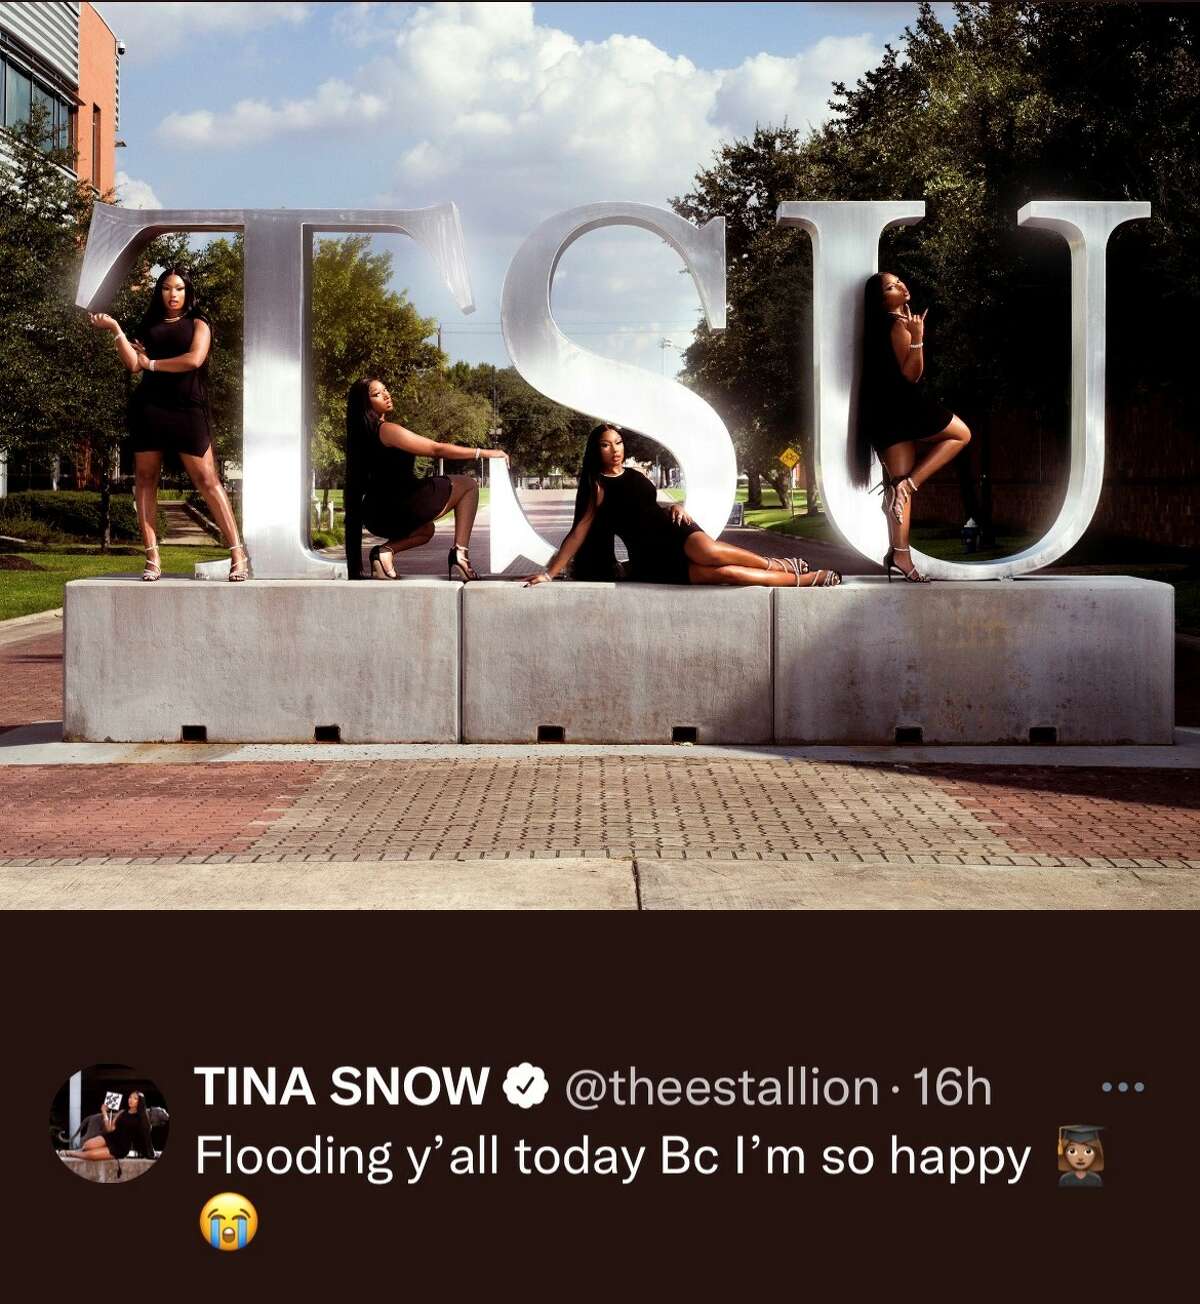 Megan Thee Stallion shared her TSU graduation photos with fans on social media.